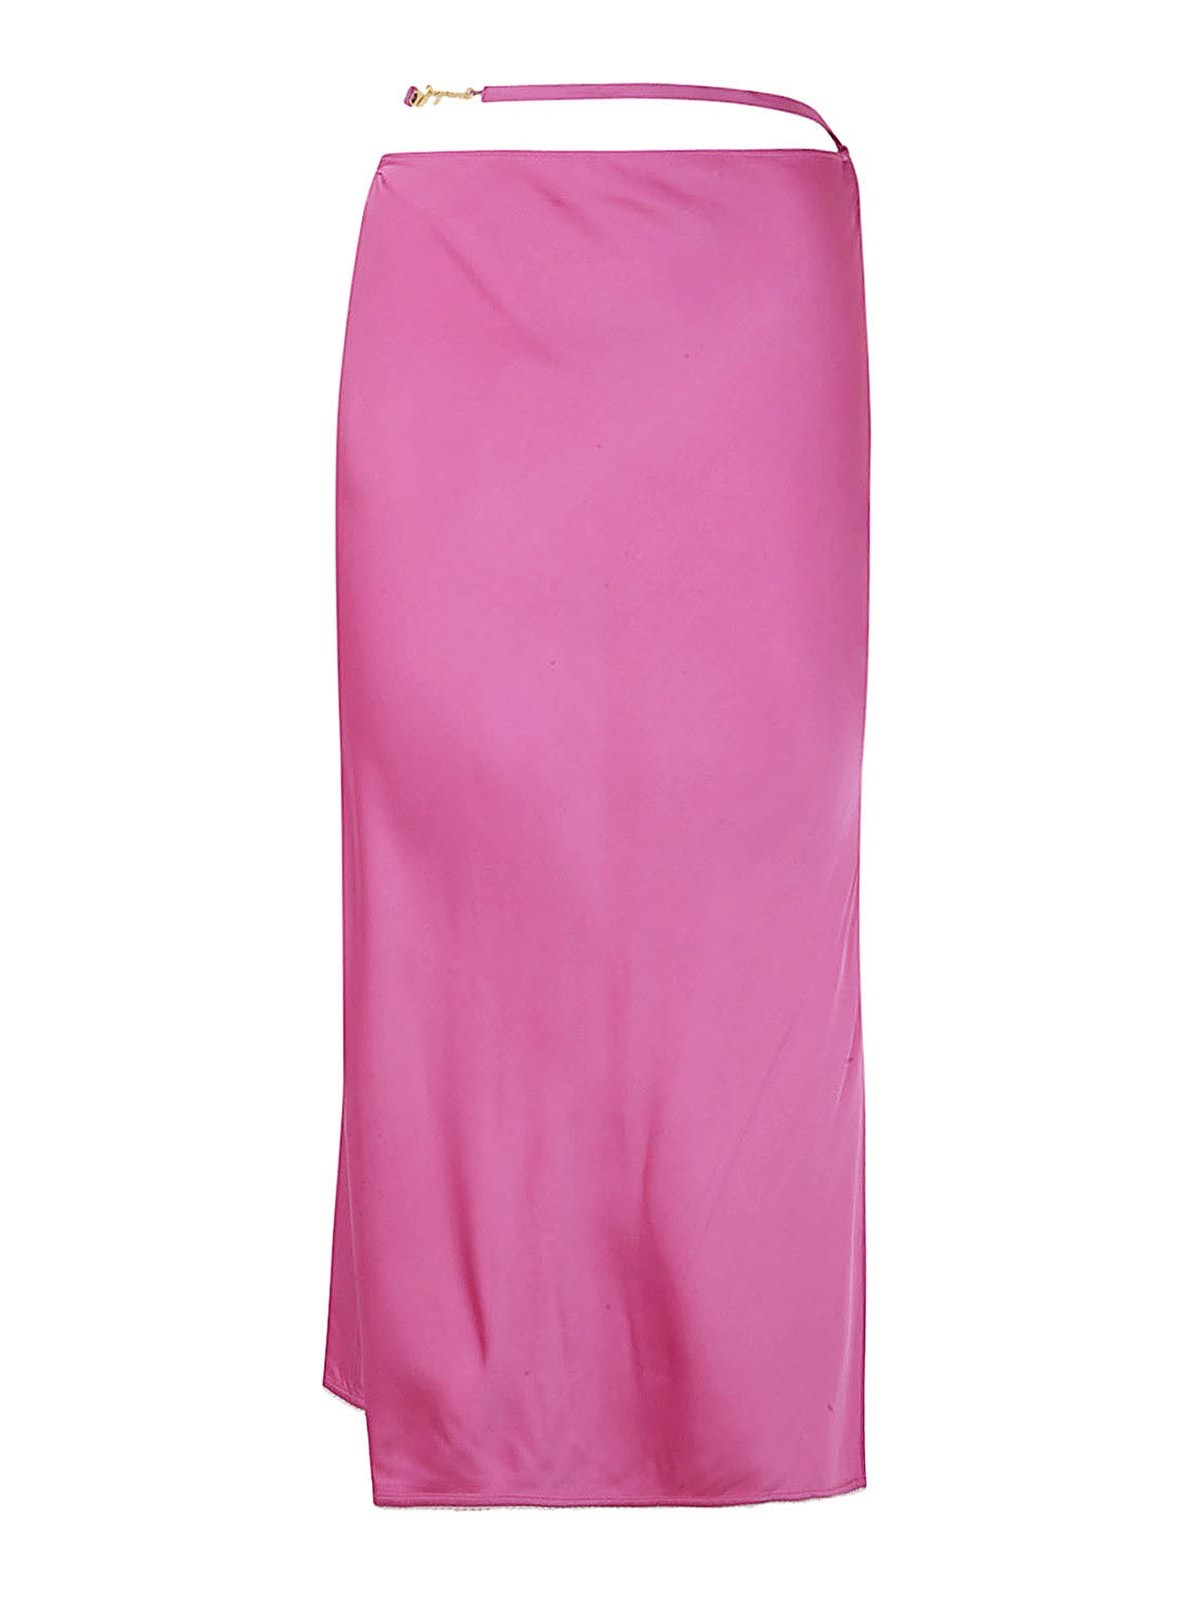 Jacquemus La Jupe Notte Skirt In Pink